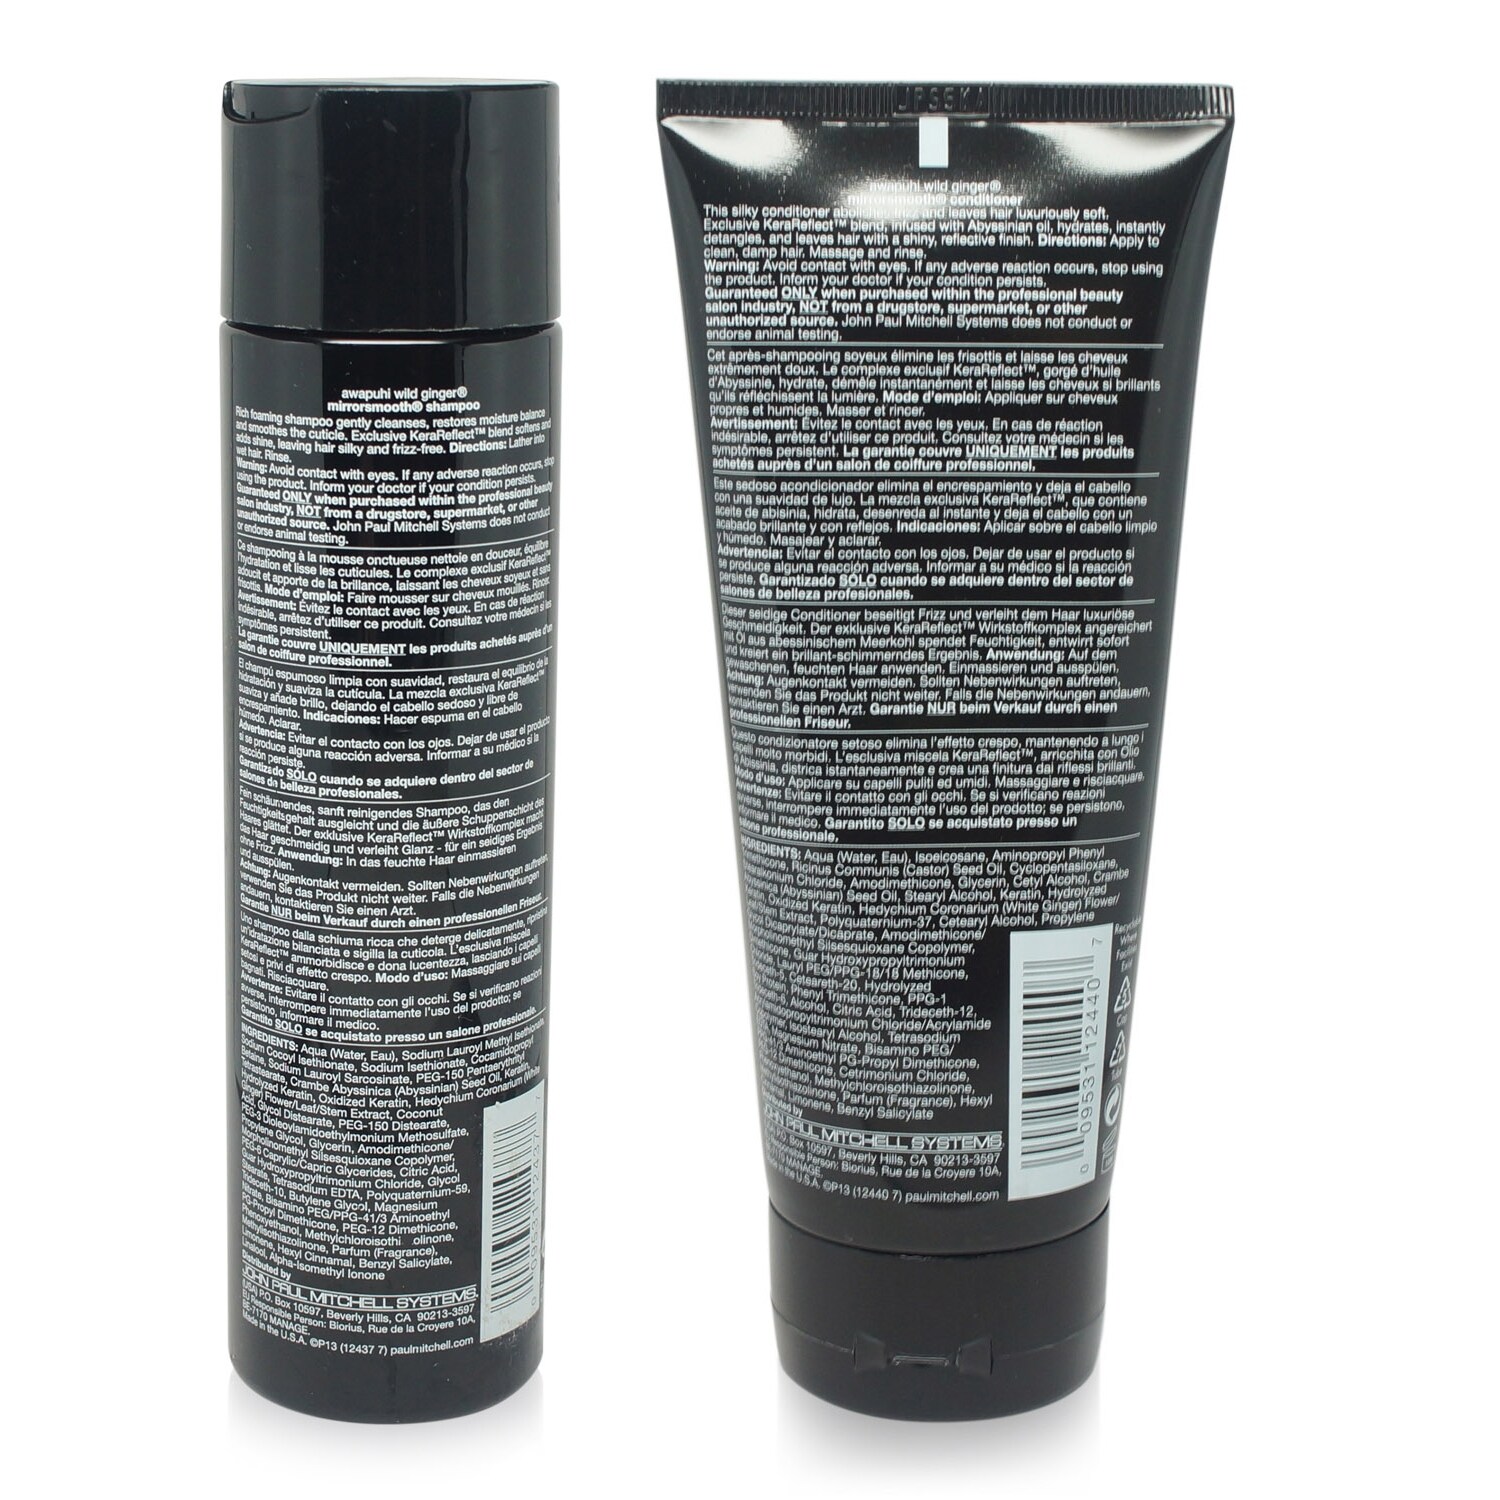 Paul Mitchell Mirror Smooth Awapuhi Wild Ginger Shampoo And Conditioner 6 8 Oz Combo Pack Overstock